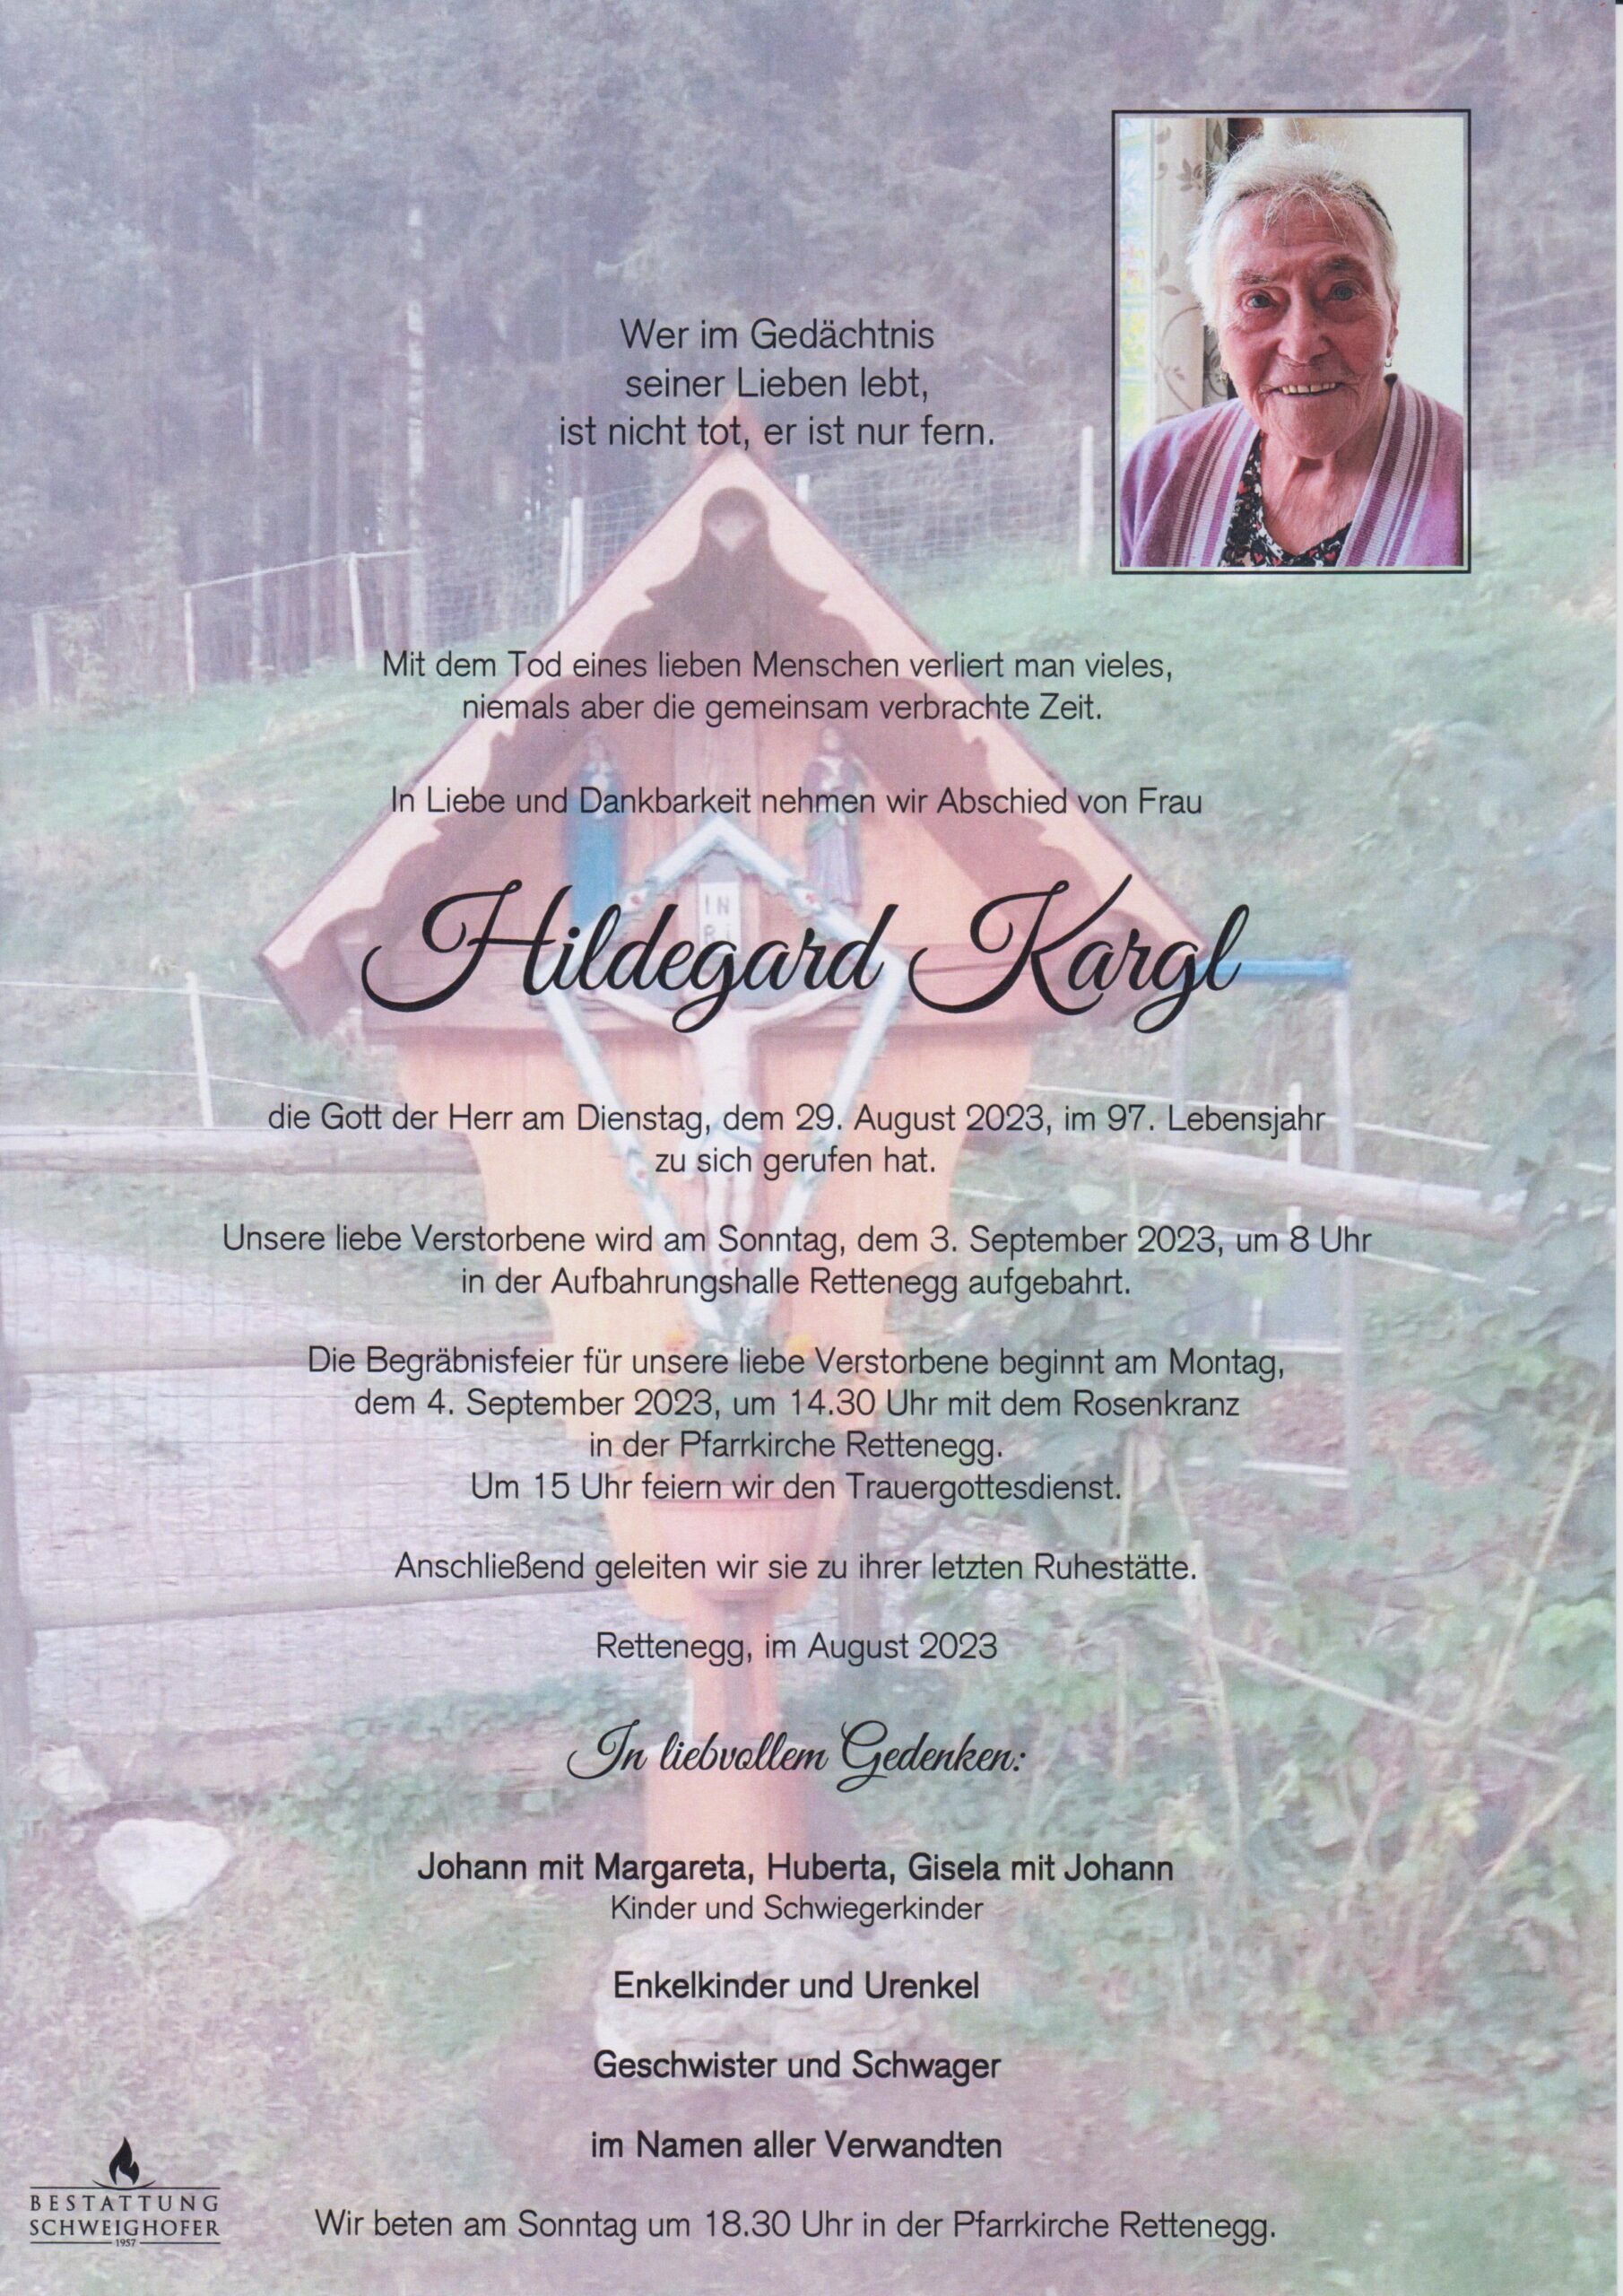 You are currently viewing Hildegard Kargl